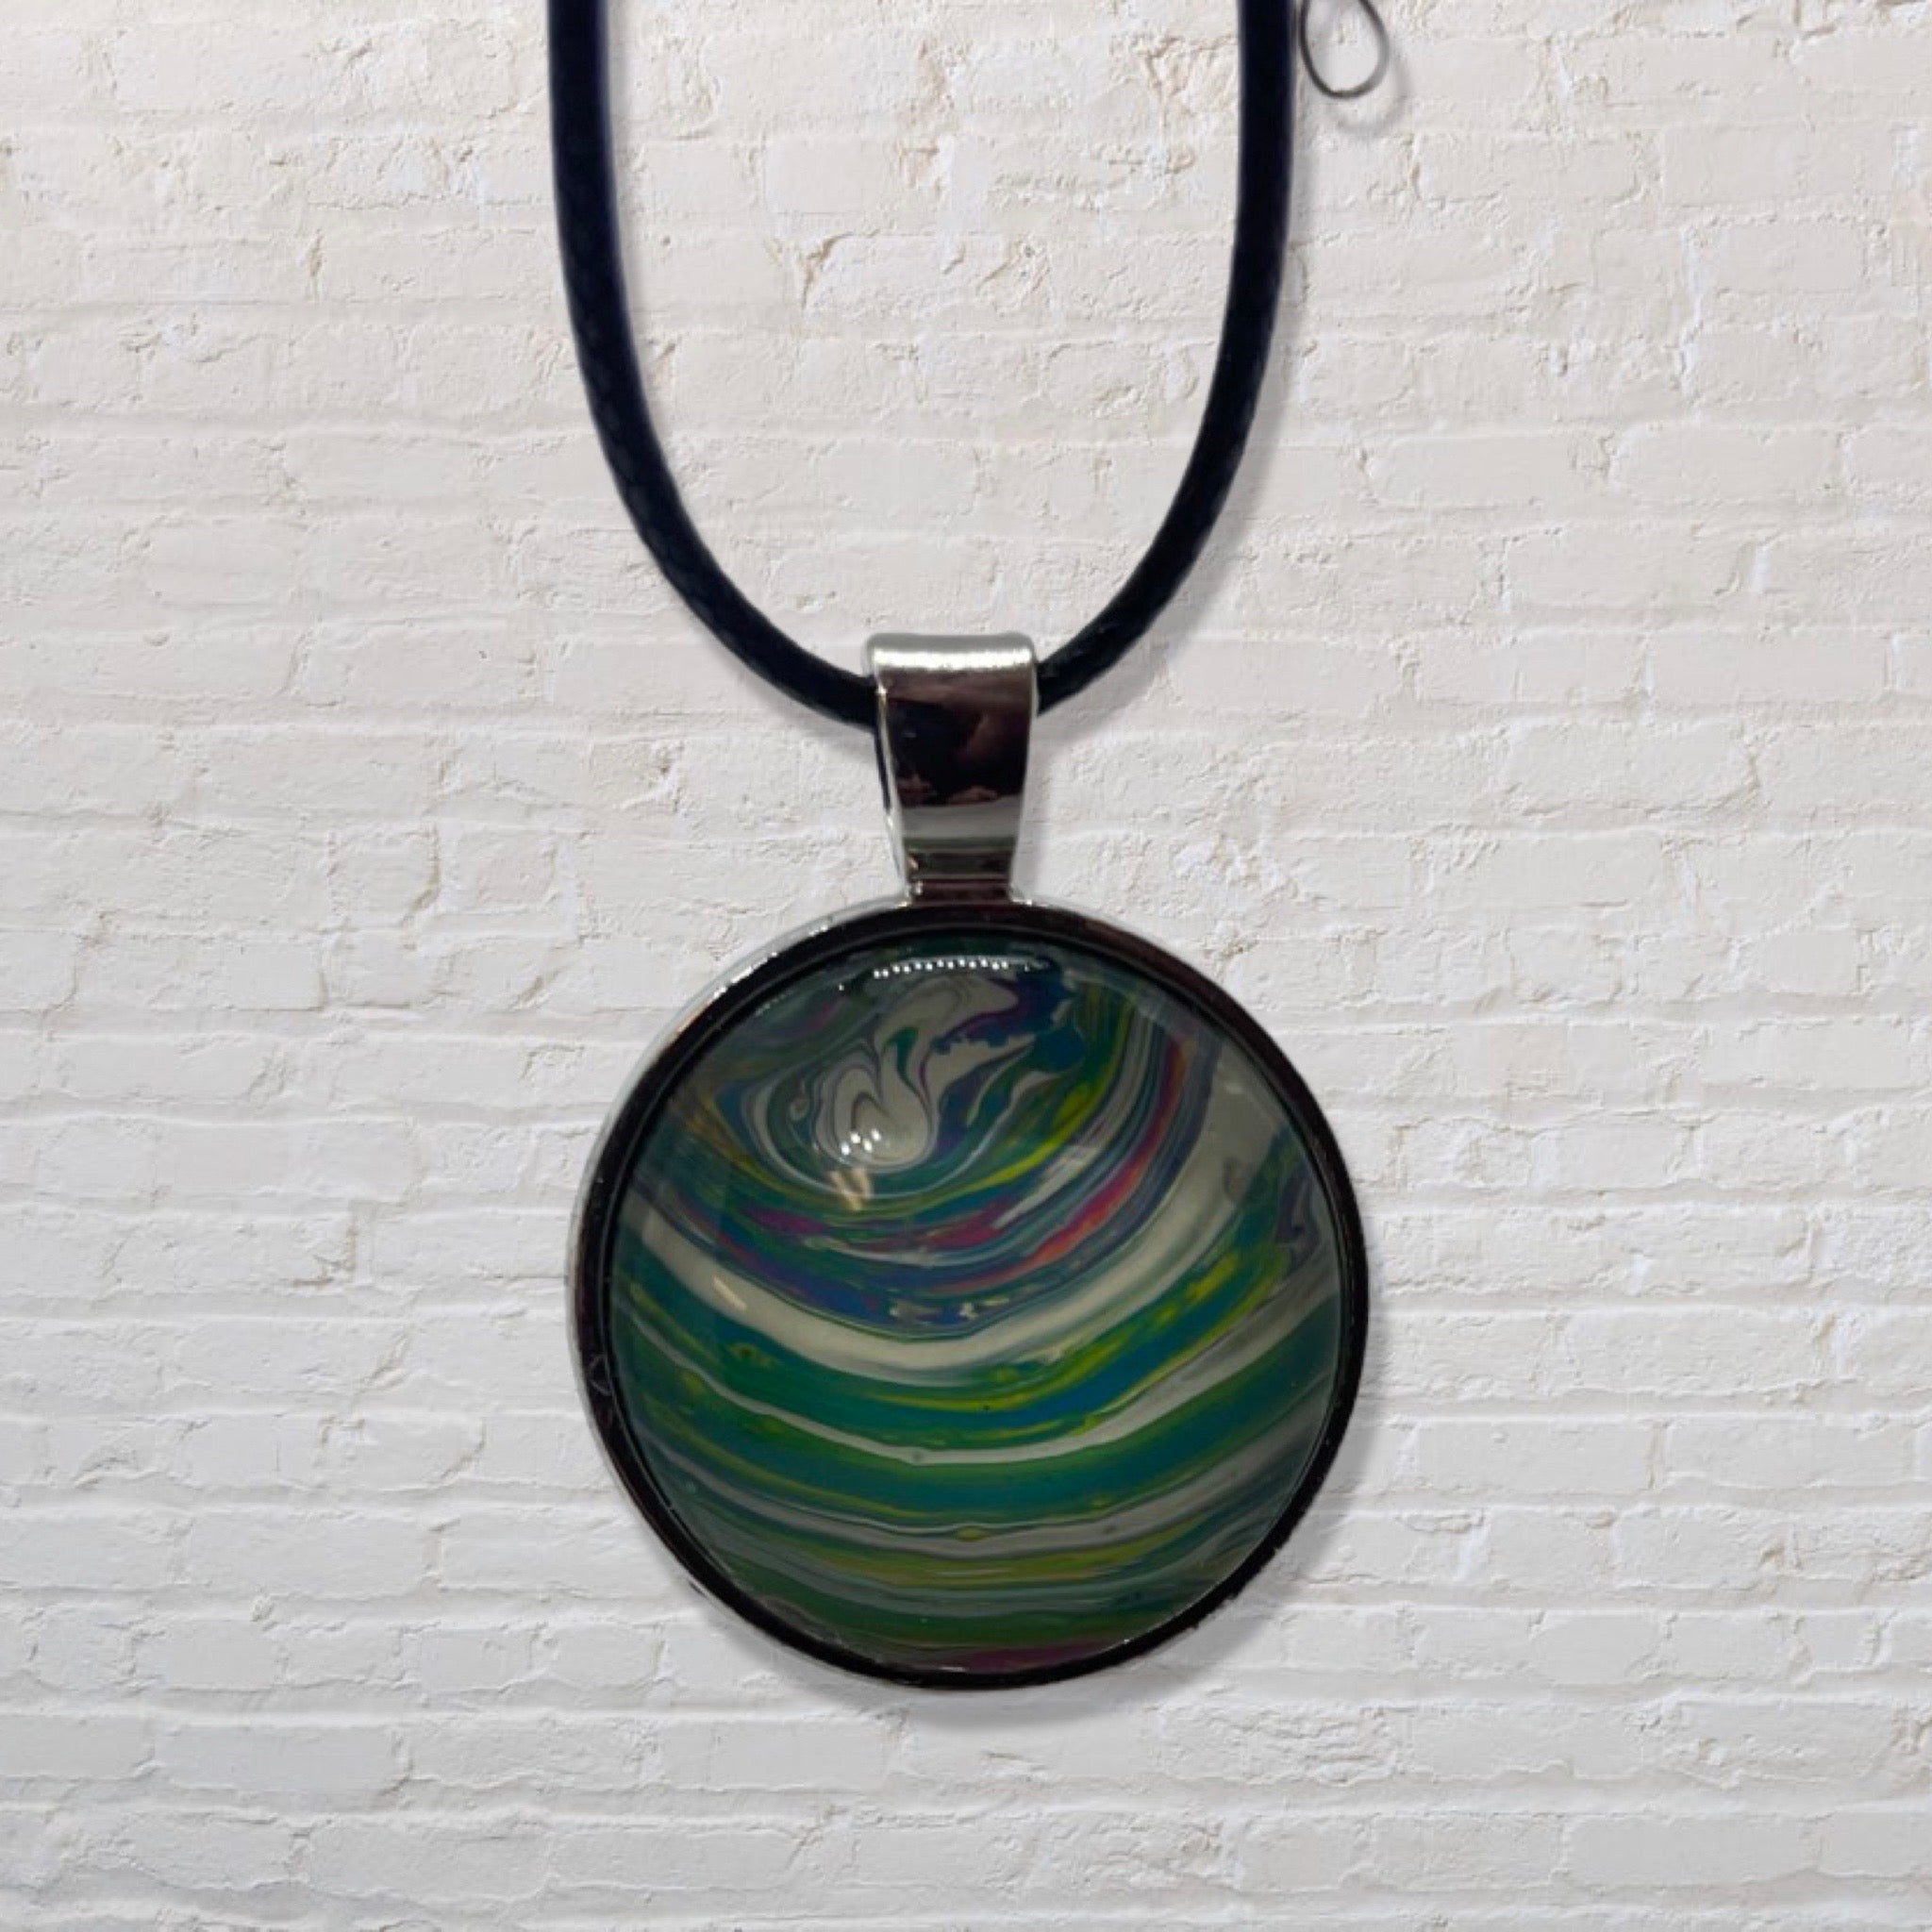 By The Kids -- Paint Pour Necklace - Green and White